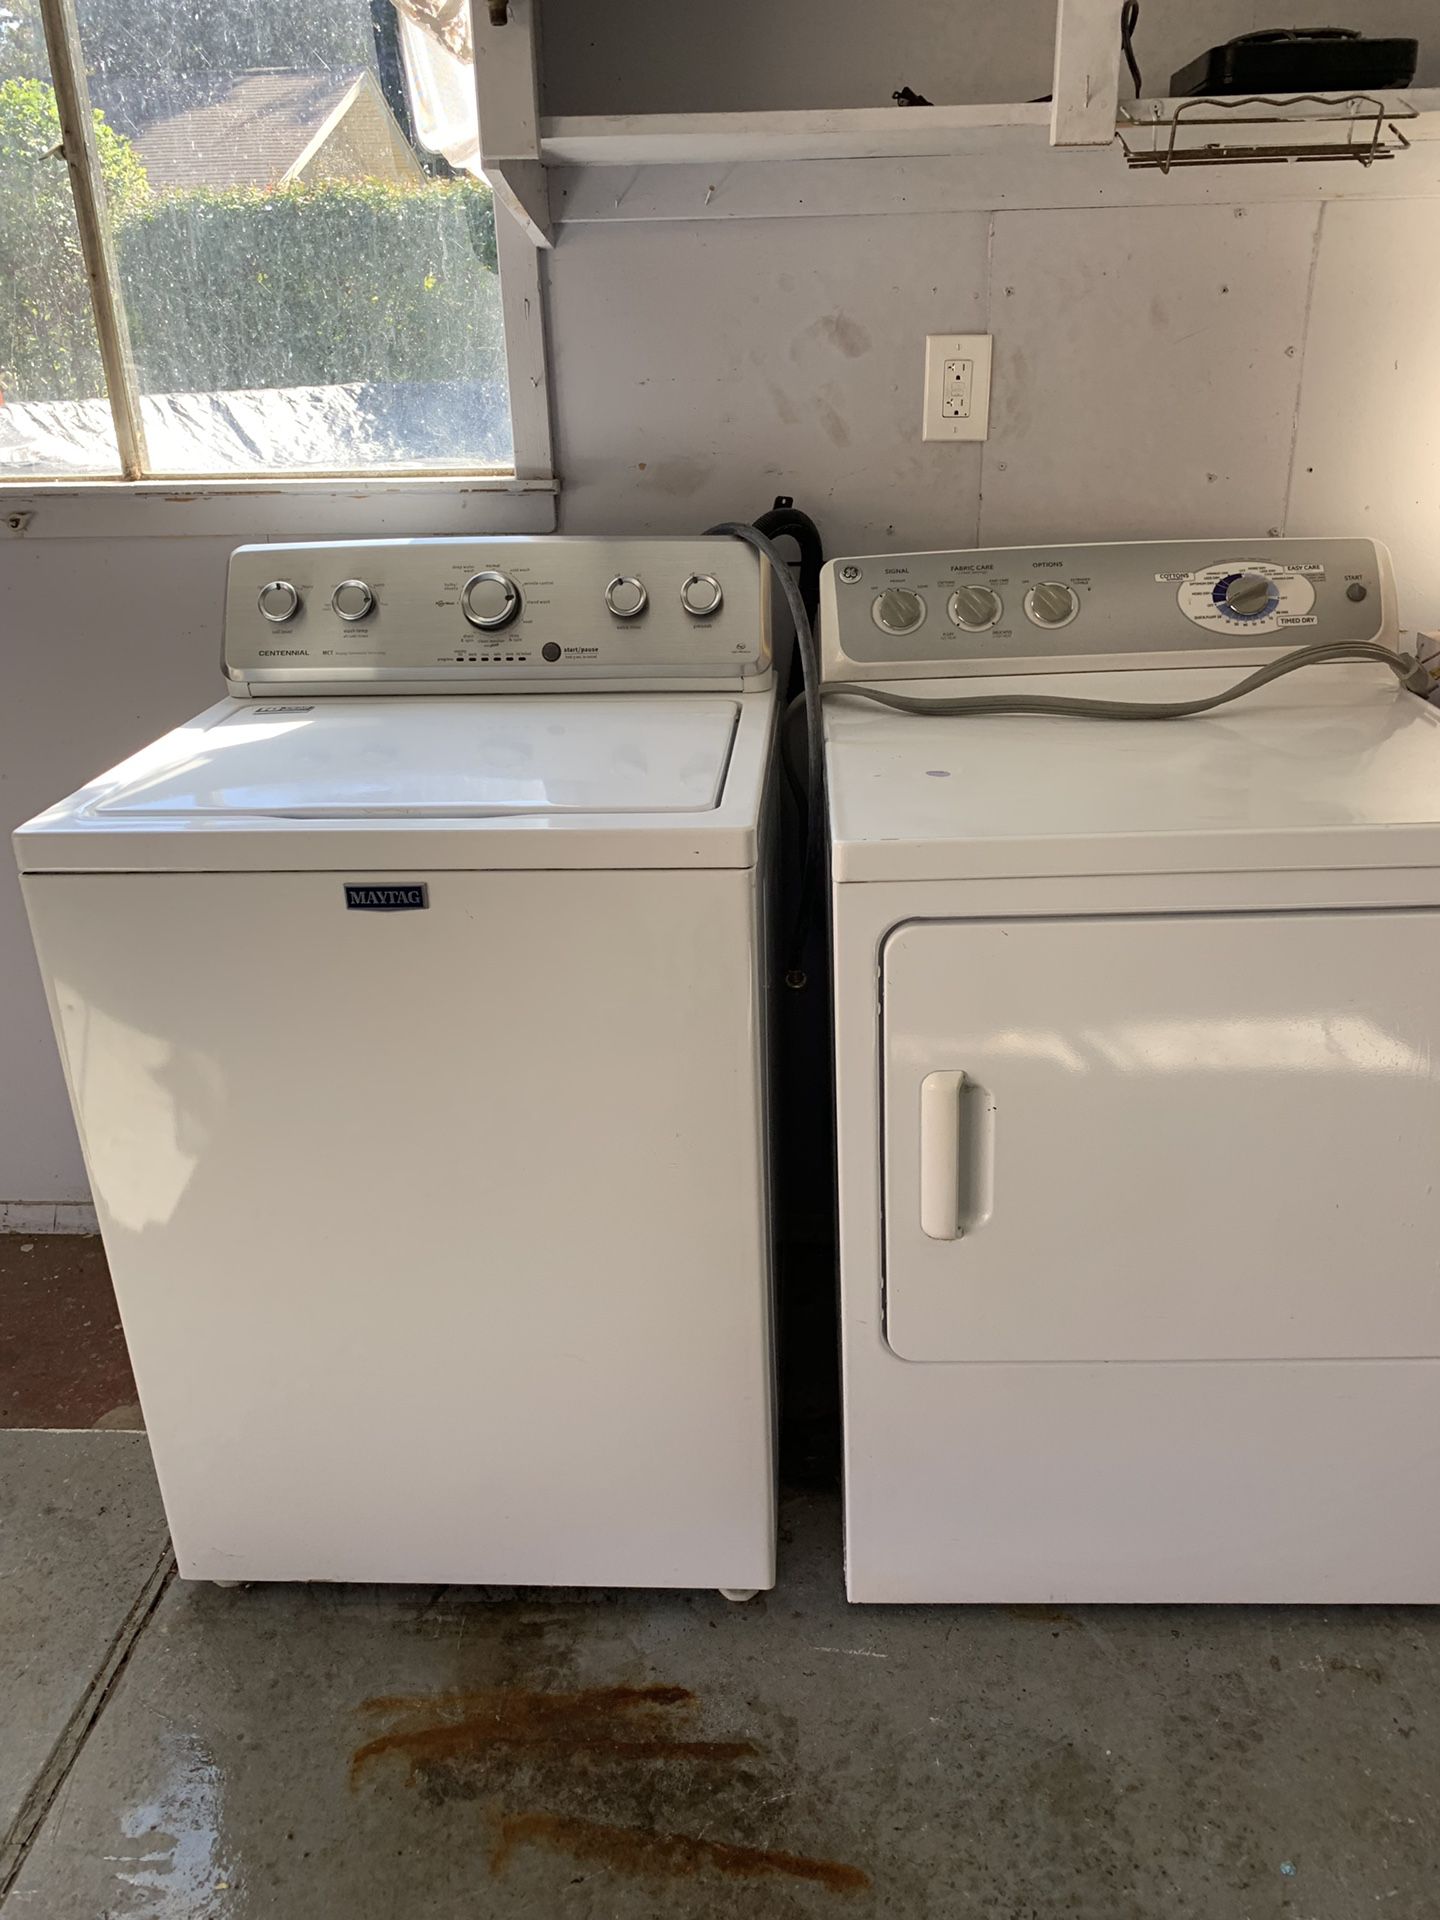 Centennial washer ge dryer both large capacity washer is water saver by weight